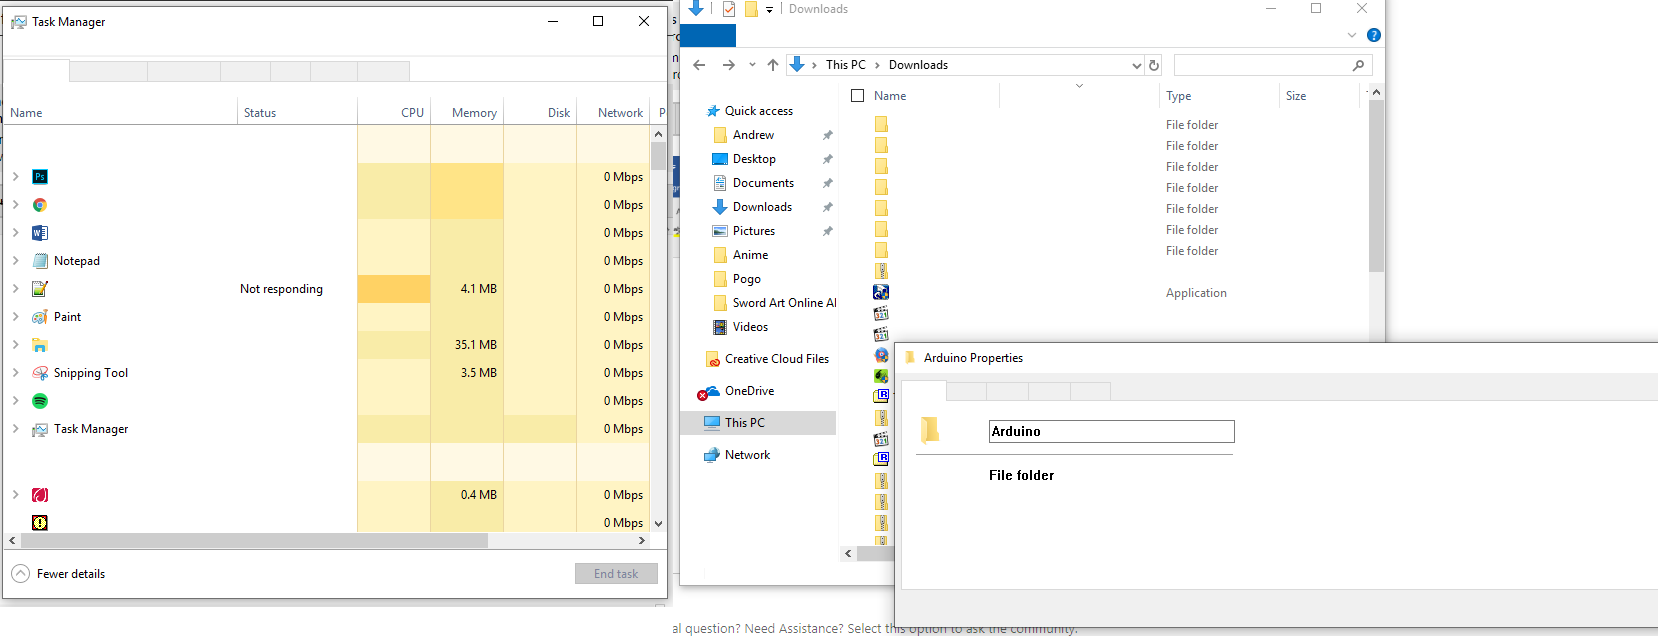 Windows 10: Text and fonts disappear from drop down menus, taskbar, explorer, and any... fe66bb6b-cc04-4907-8ca4-4243c06becf1?upload=true.png